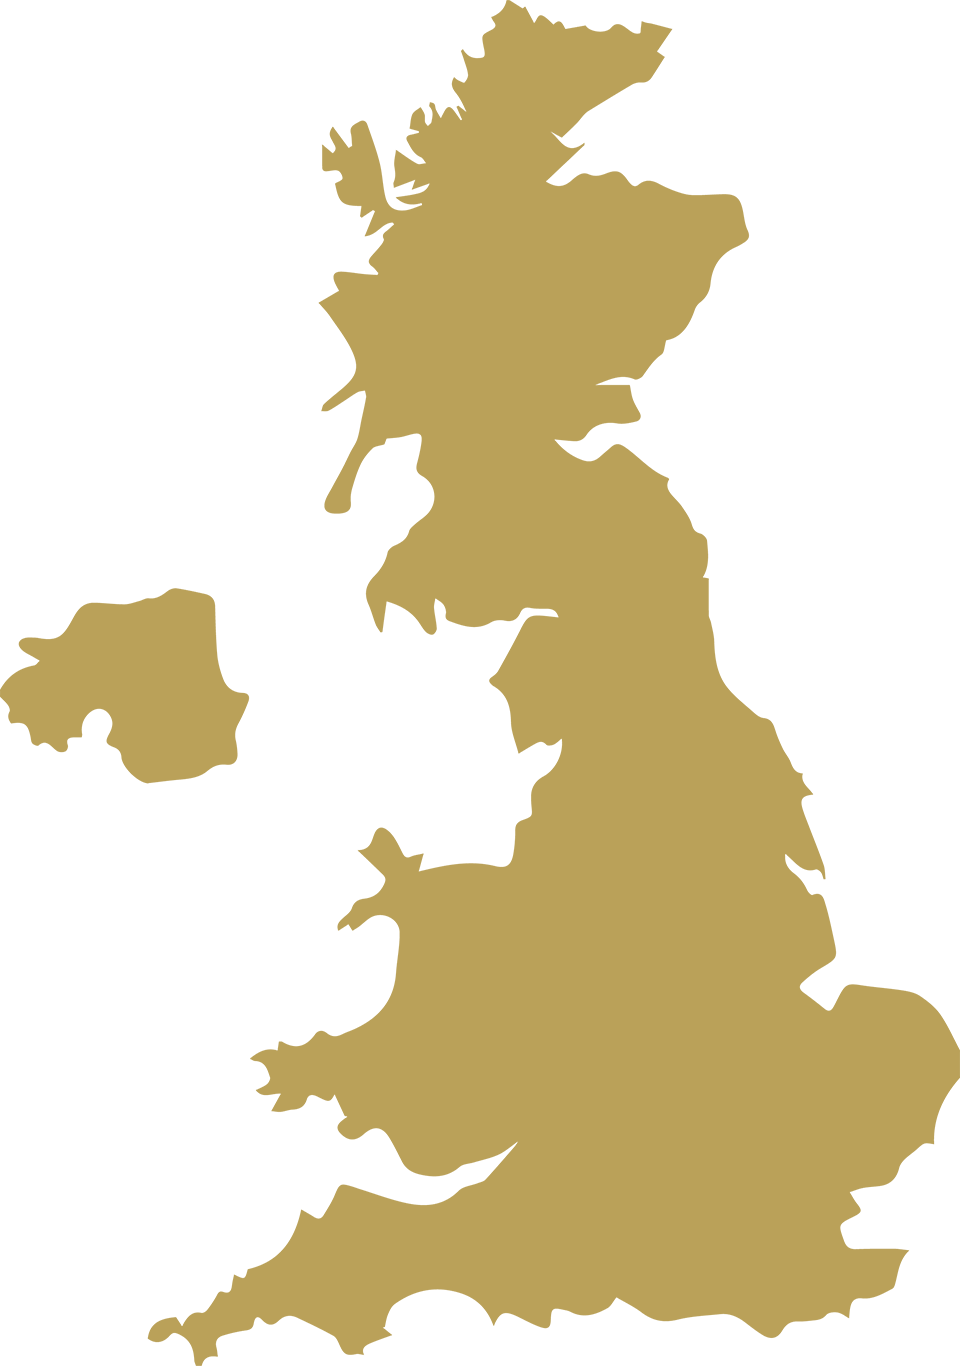 Outline map of the United Kingdom